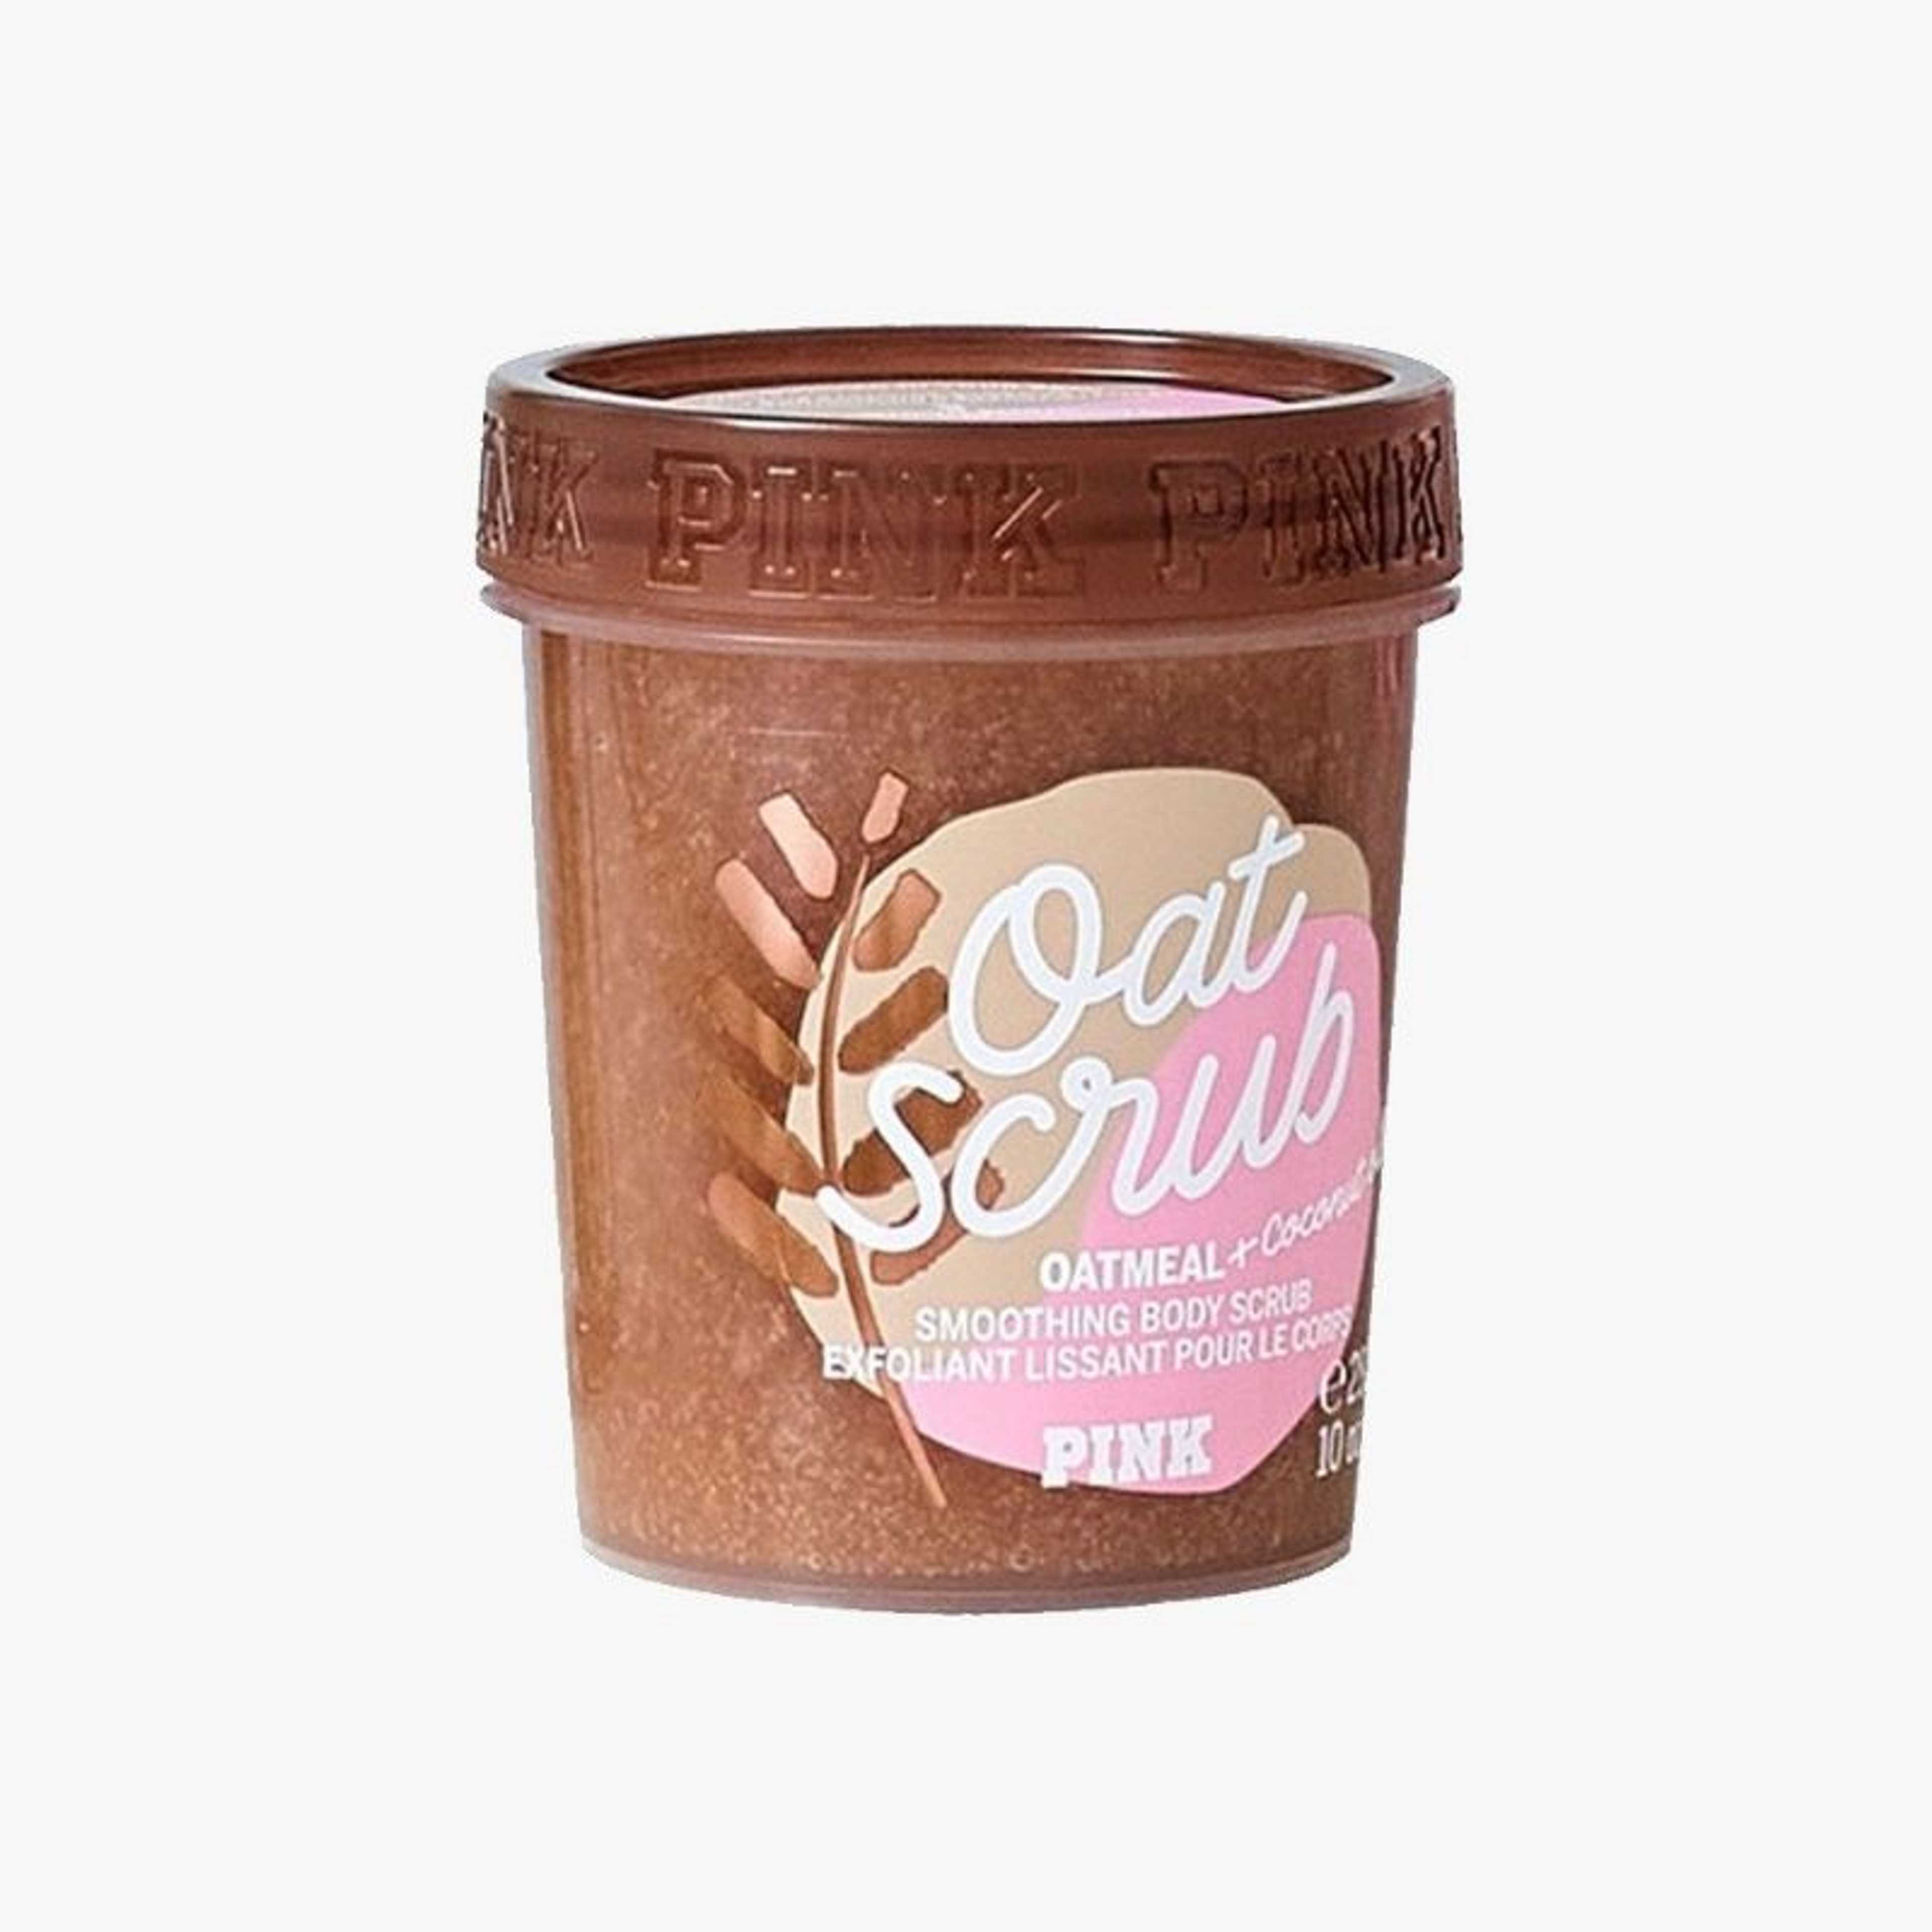 Victoria's Secret PINK Oat Scrub Smoothing Body Scrub with Colloidal Oatmeal